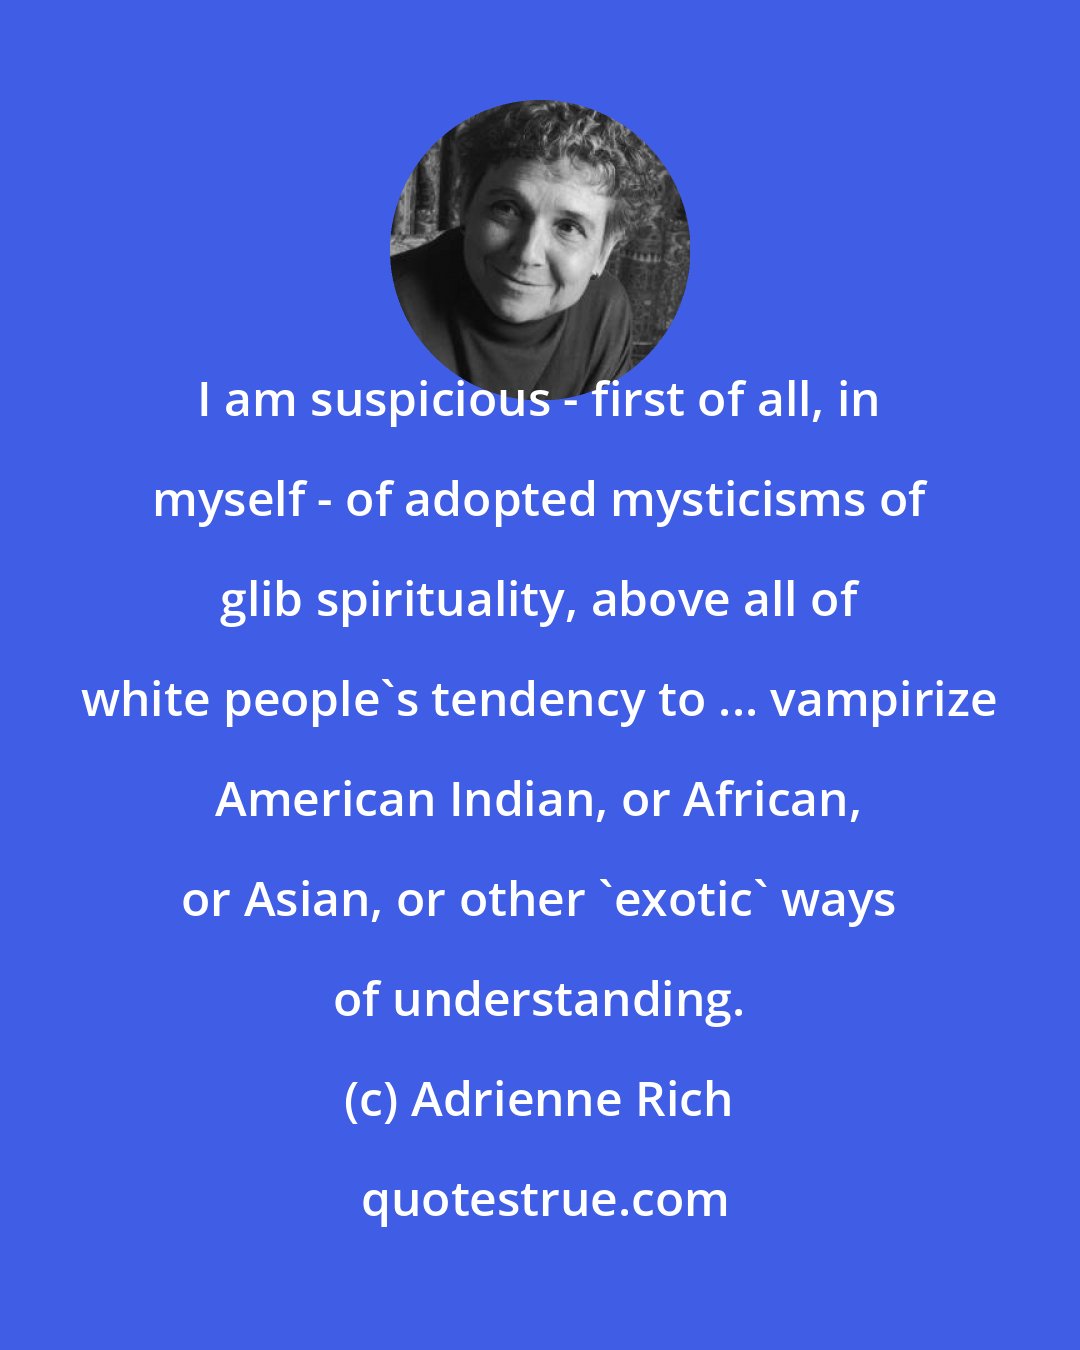 Adrienne Rich: I am suspicious - first of all, in myself - of adopted mysticisms of glib spirituality, above all of white people's tendency to ... vampirize American Indian, or African, or Asian, or other 'exotic' ways of understanding.